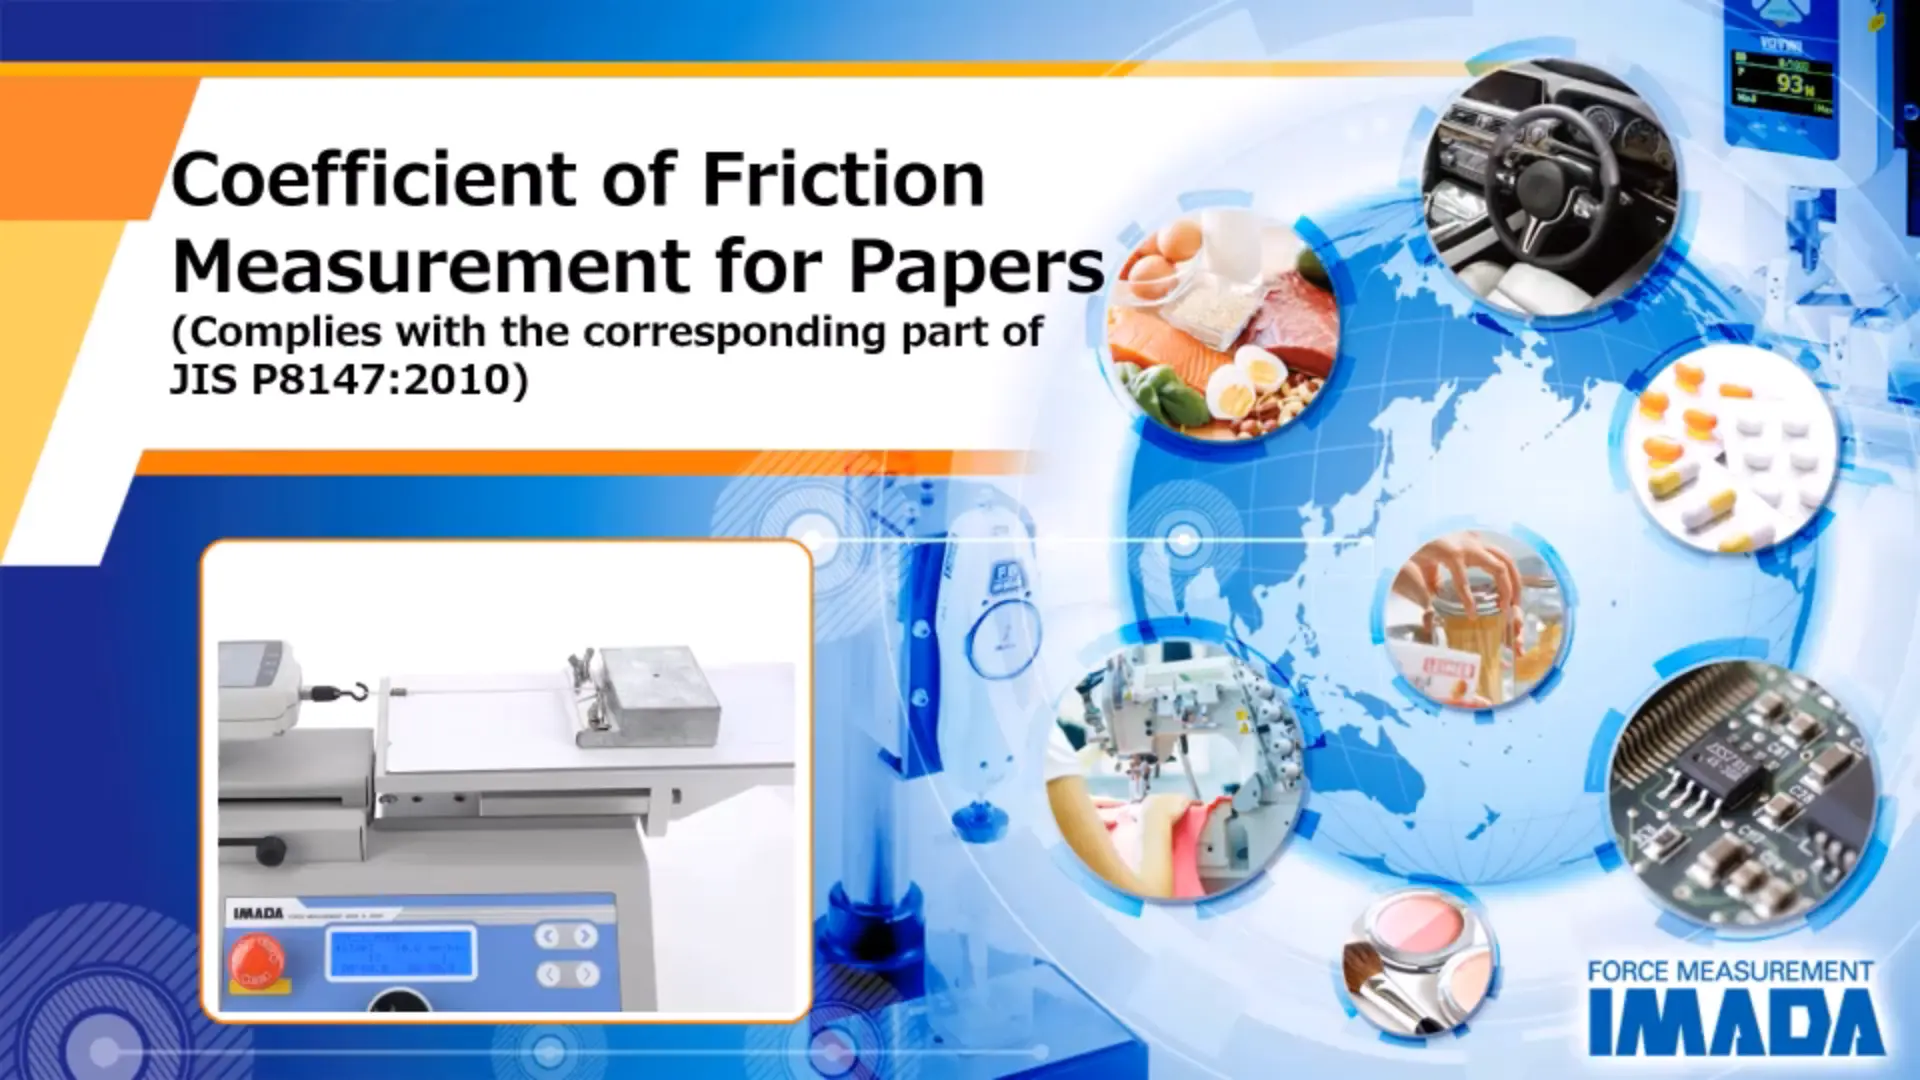 Coefficient of Friction Measurement for Papers (Complies with the corresponding part of JIS P8147: 2010)